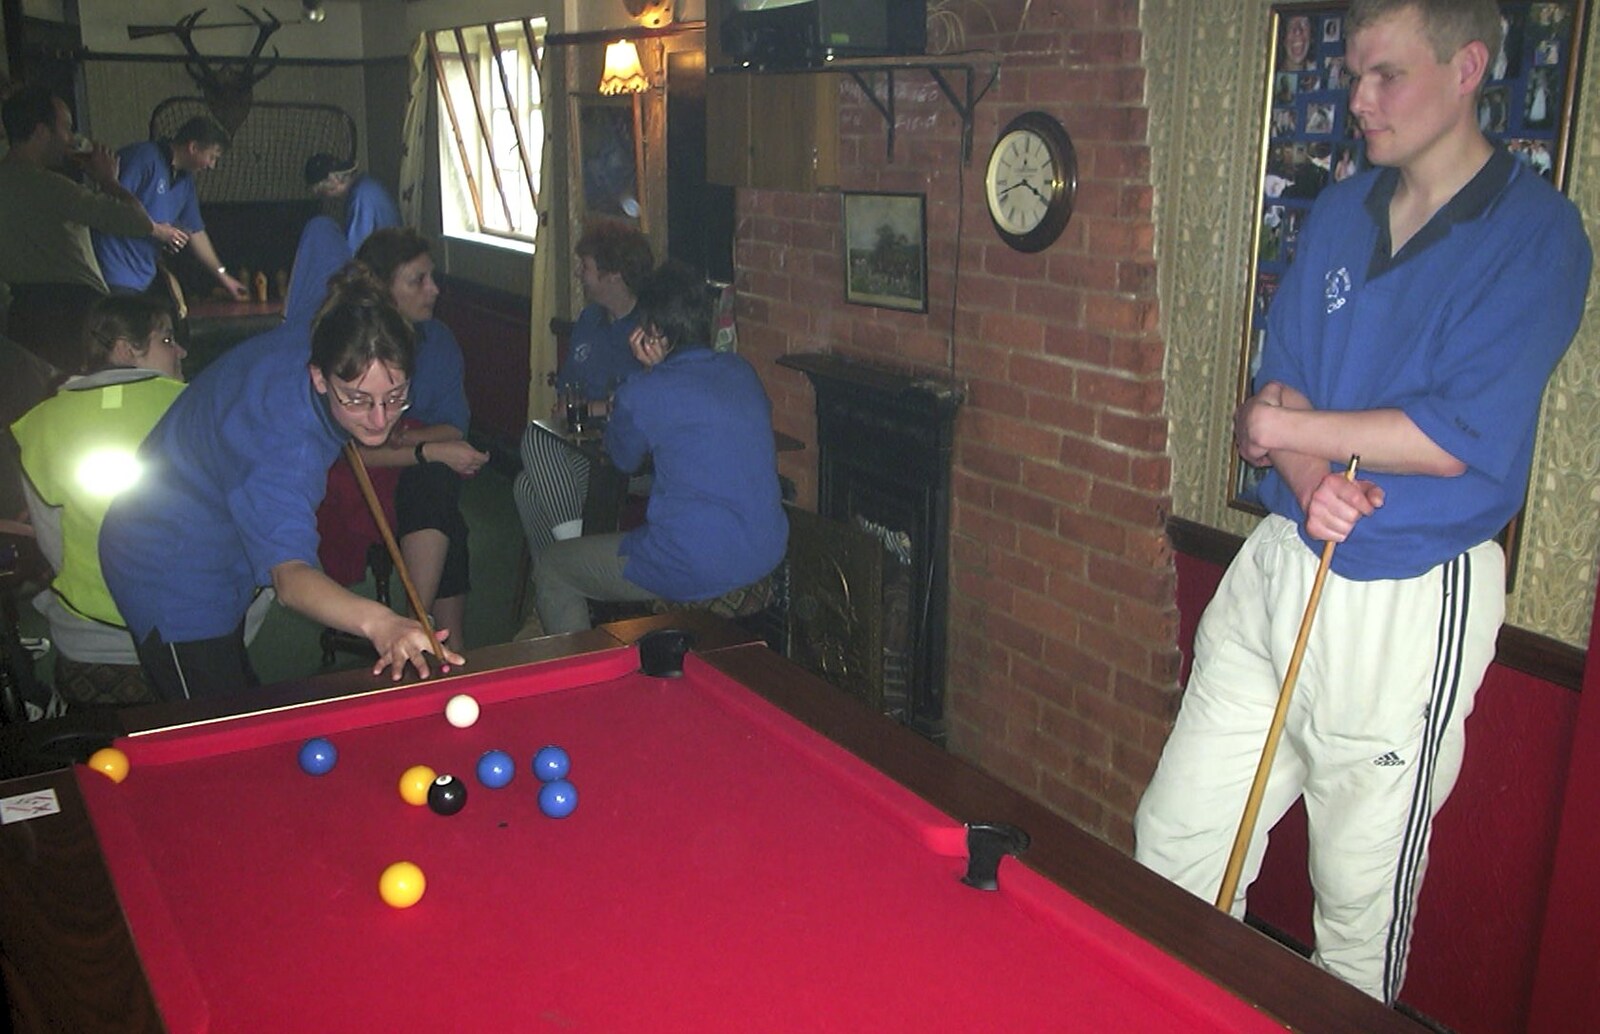 The BSCC Bike Ride, Shefford, Bedford - 11th May 2002: Stick game on red baize in The Guinea